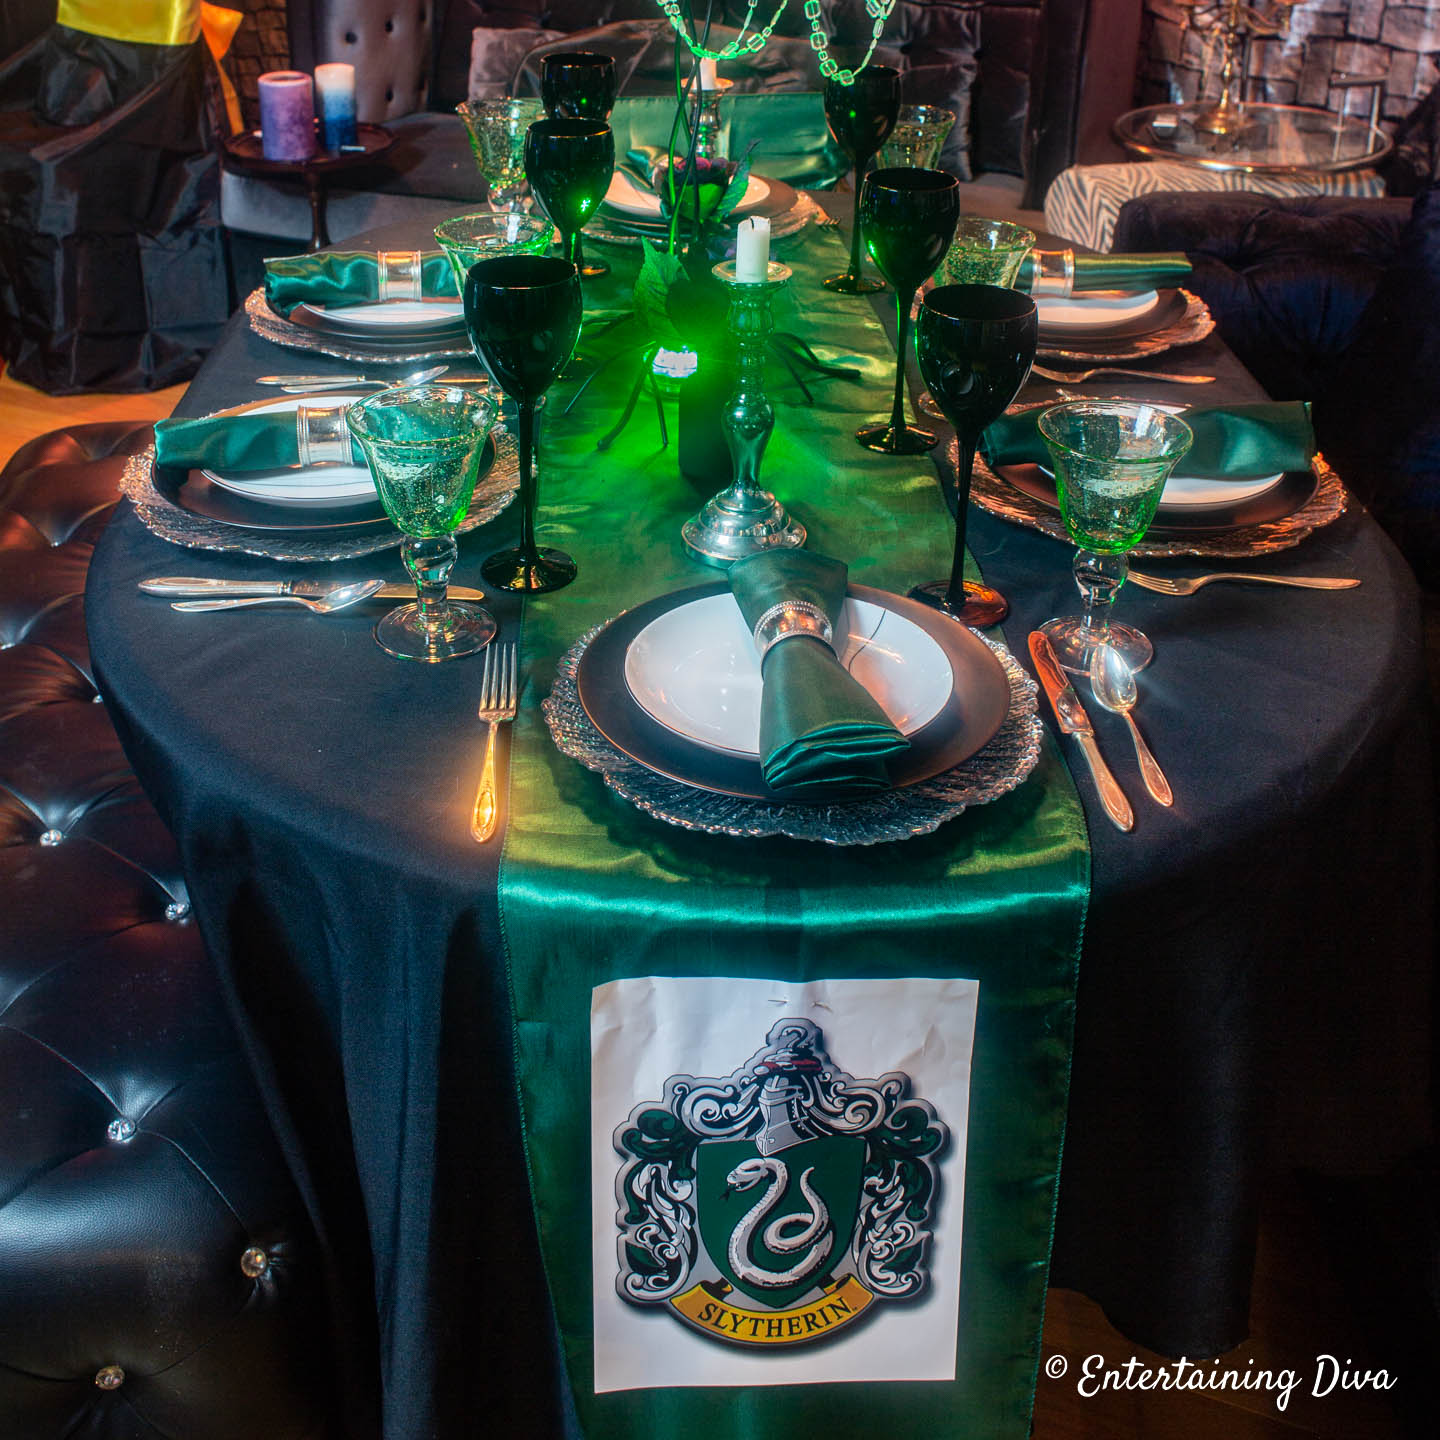 Green, silver and black table setting with a Slytherin house crest on a green table runner